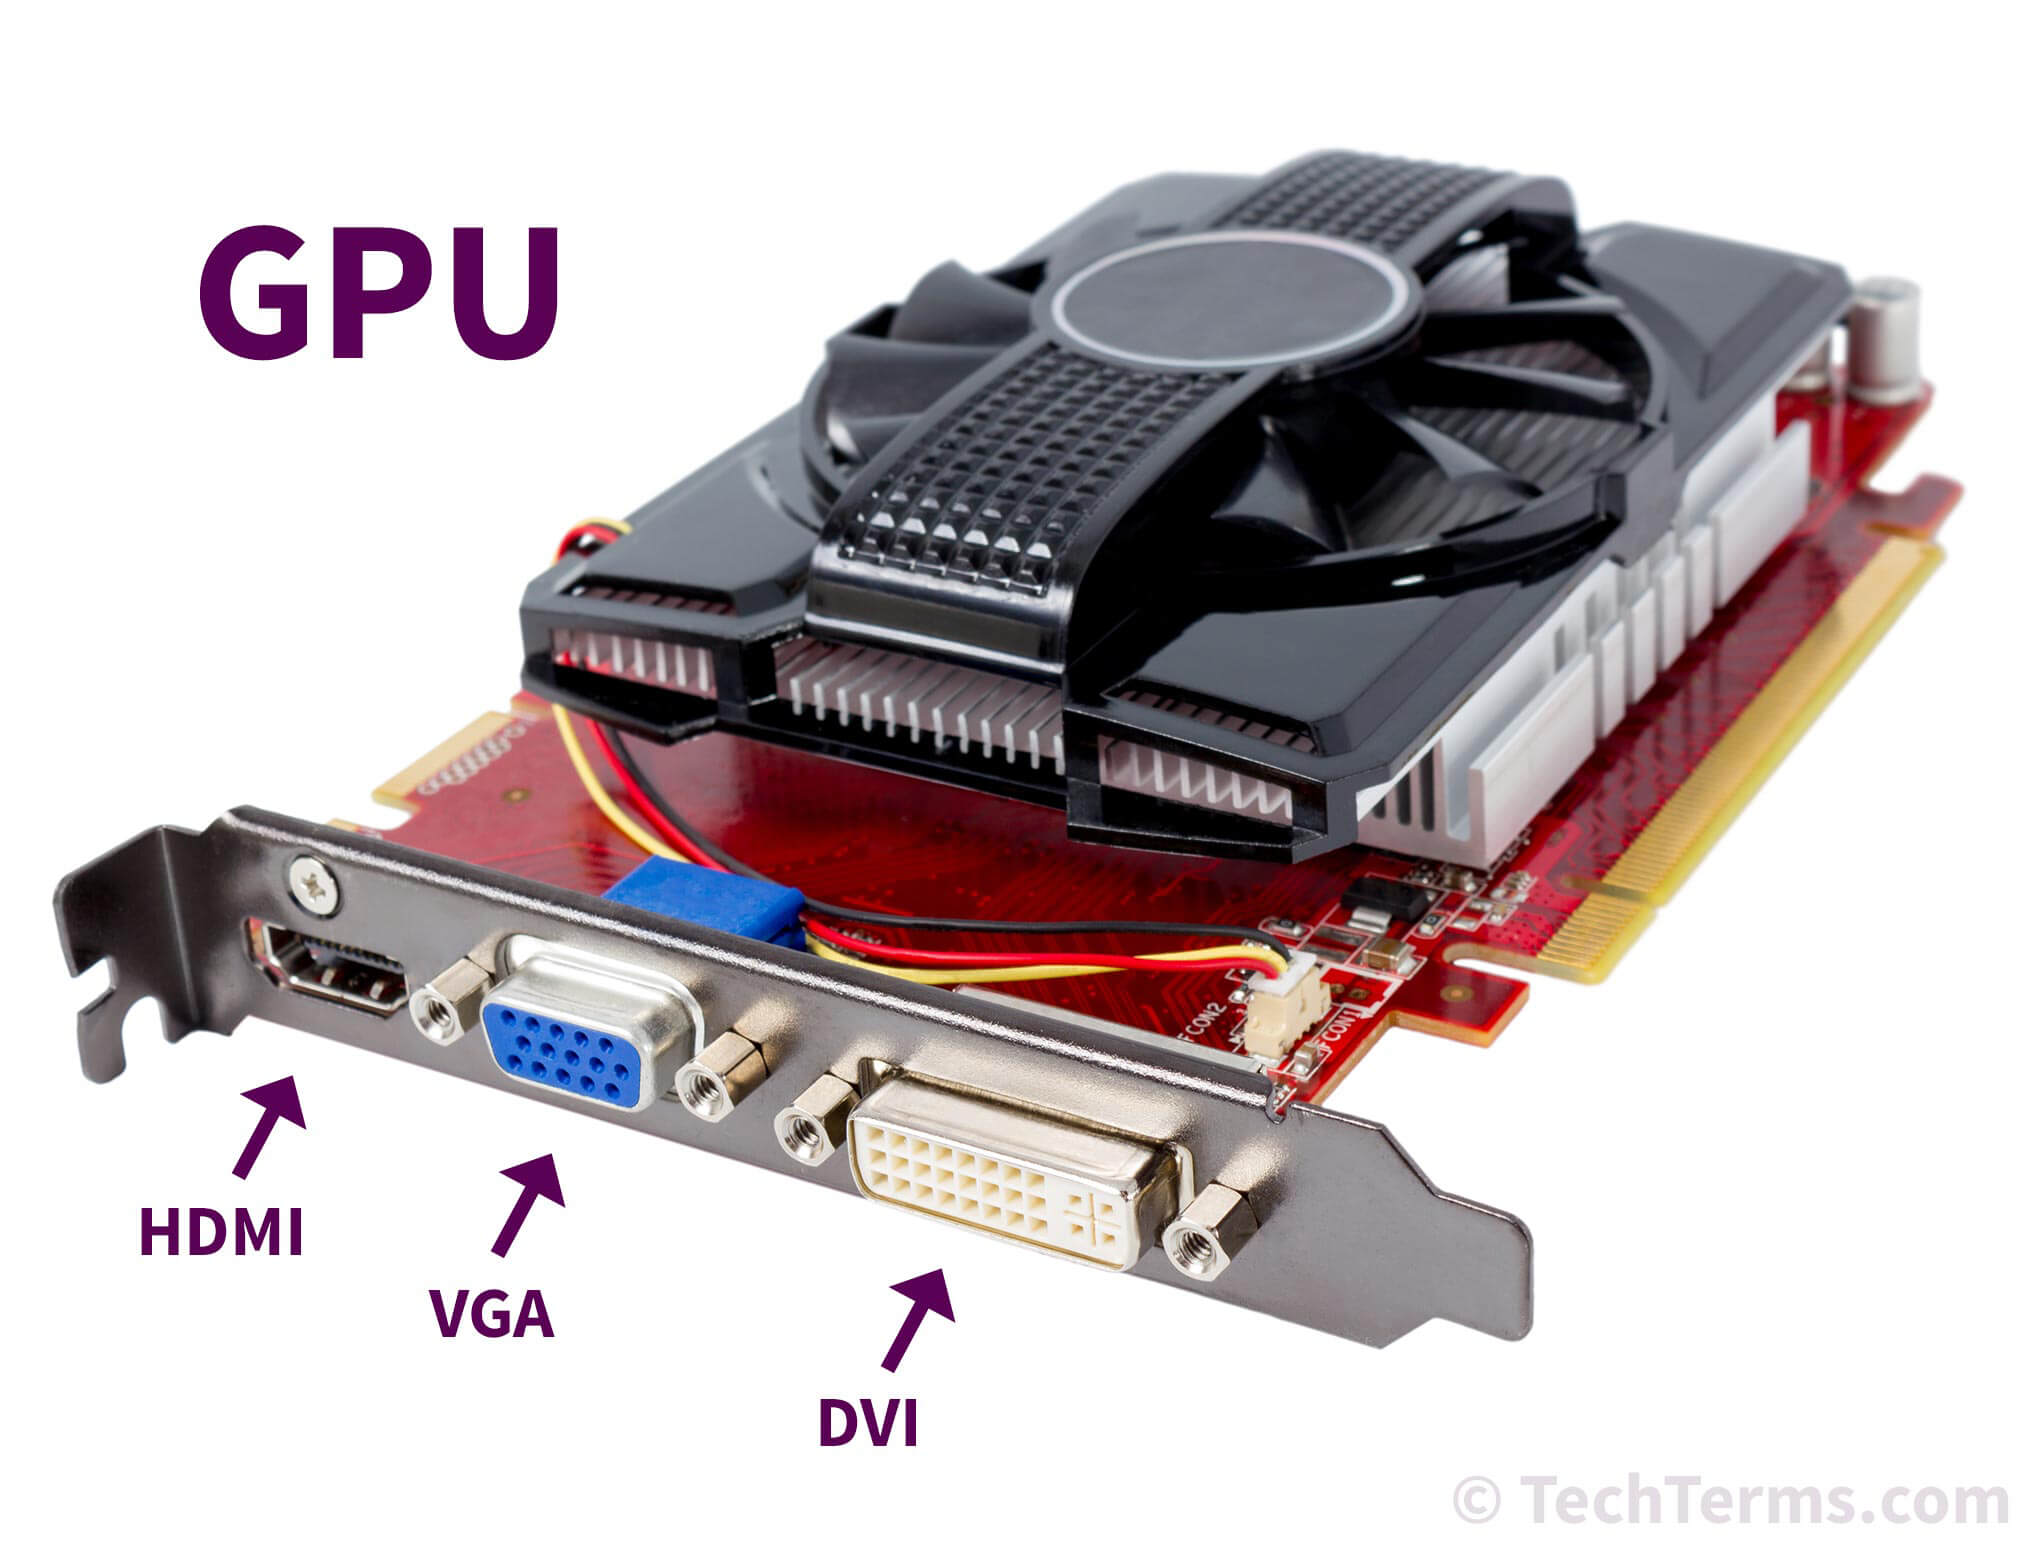 GPU Definition - What is a graphics processing unit?